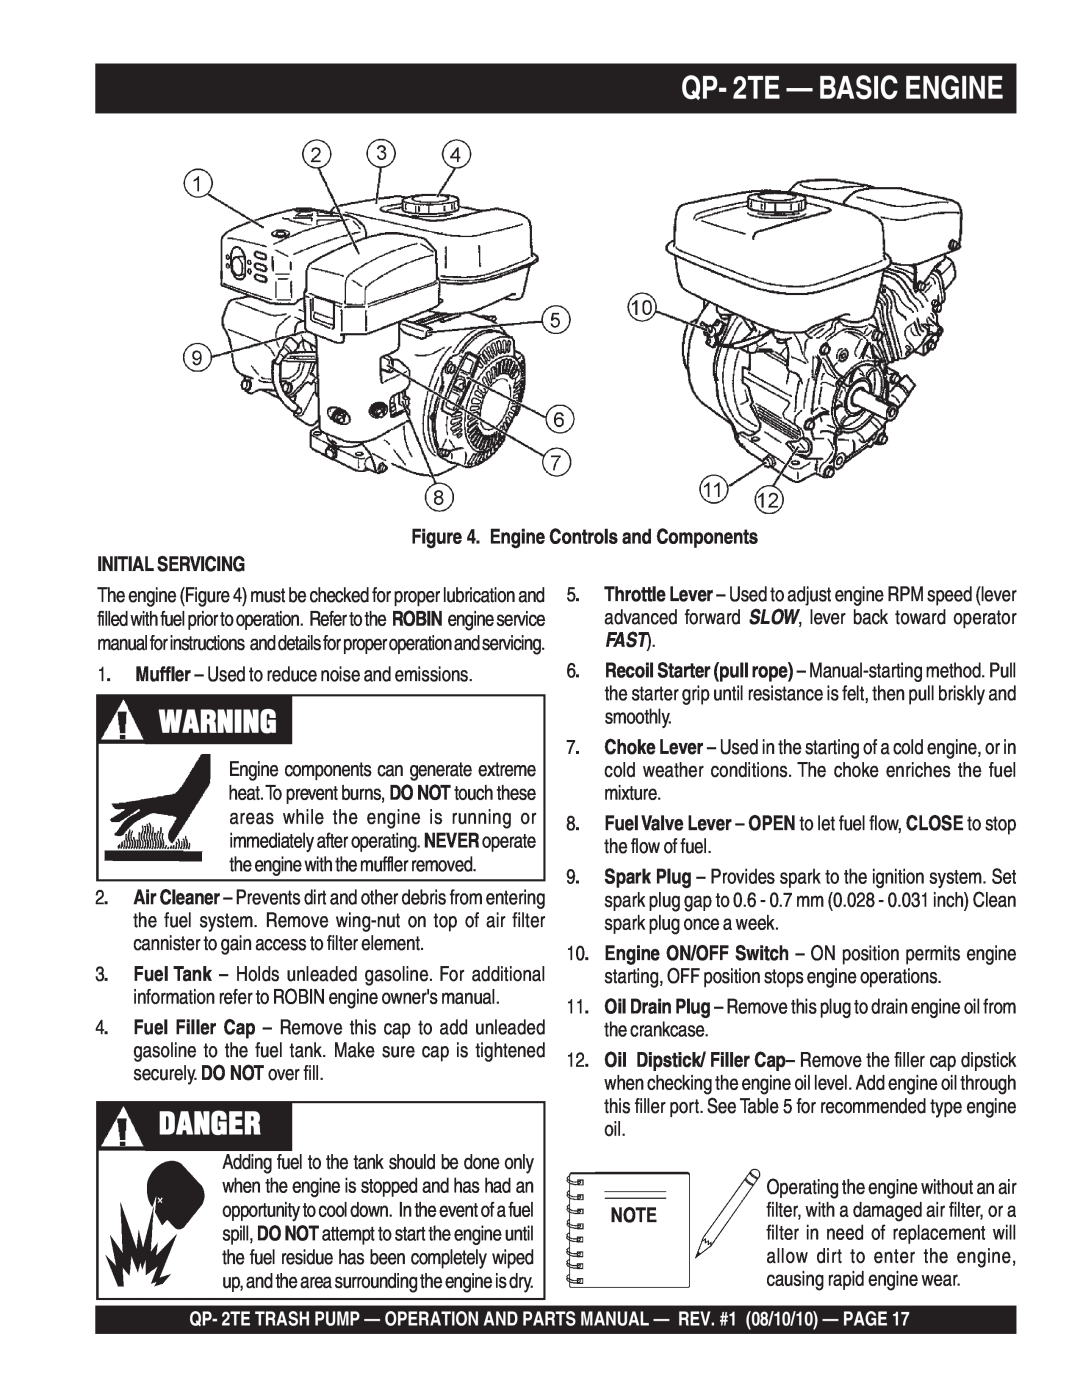 Multiquip Qp-2TE manual QP- 2TE - BASIC ENGINE, Danger, Engine Controls and Components, Initial Servicing, Fast 